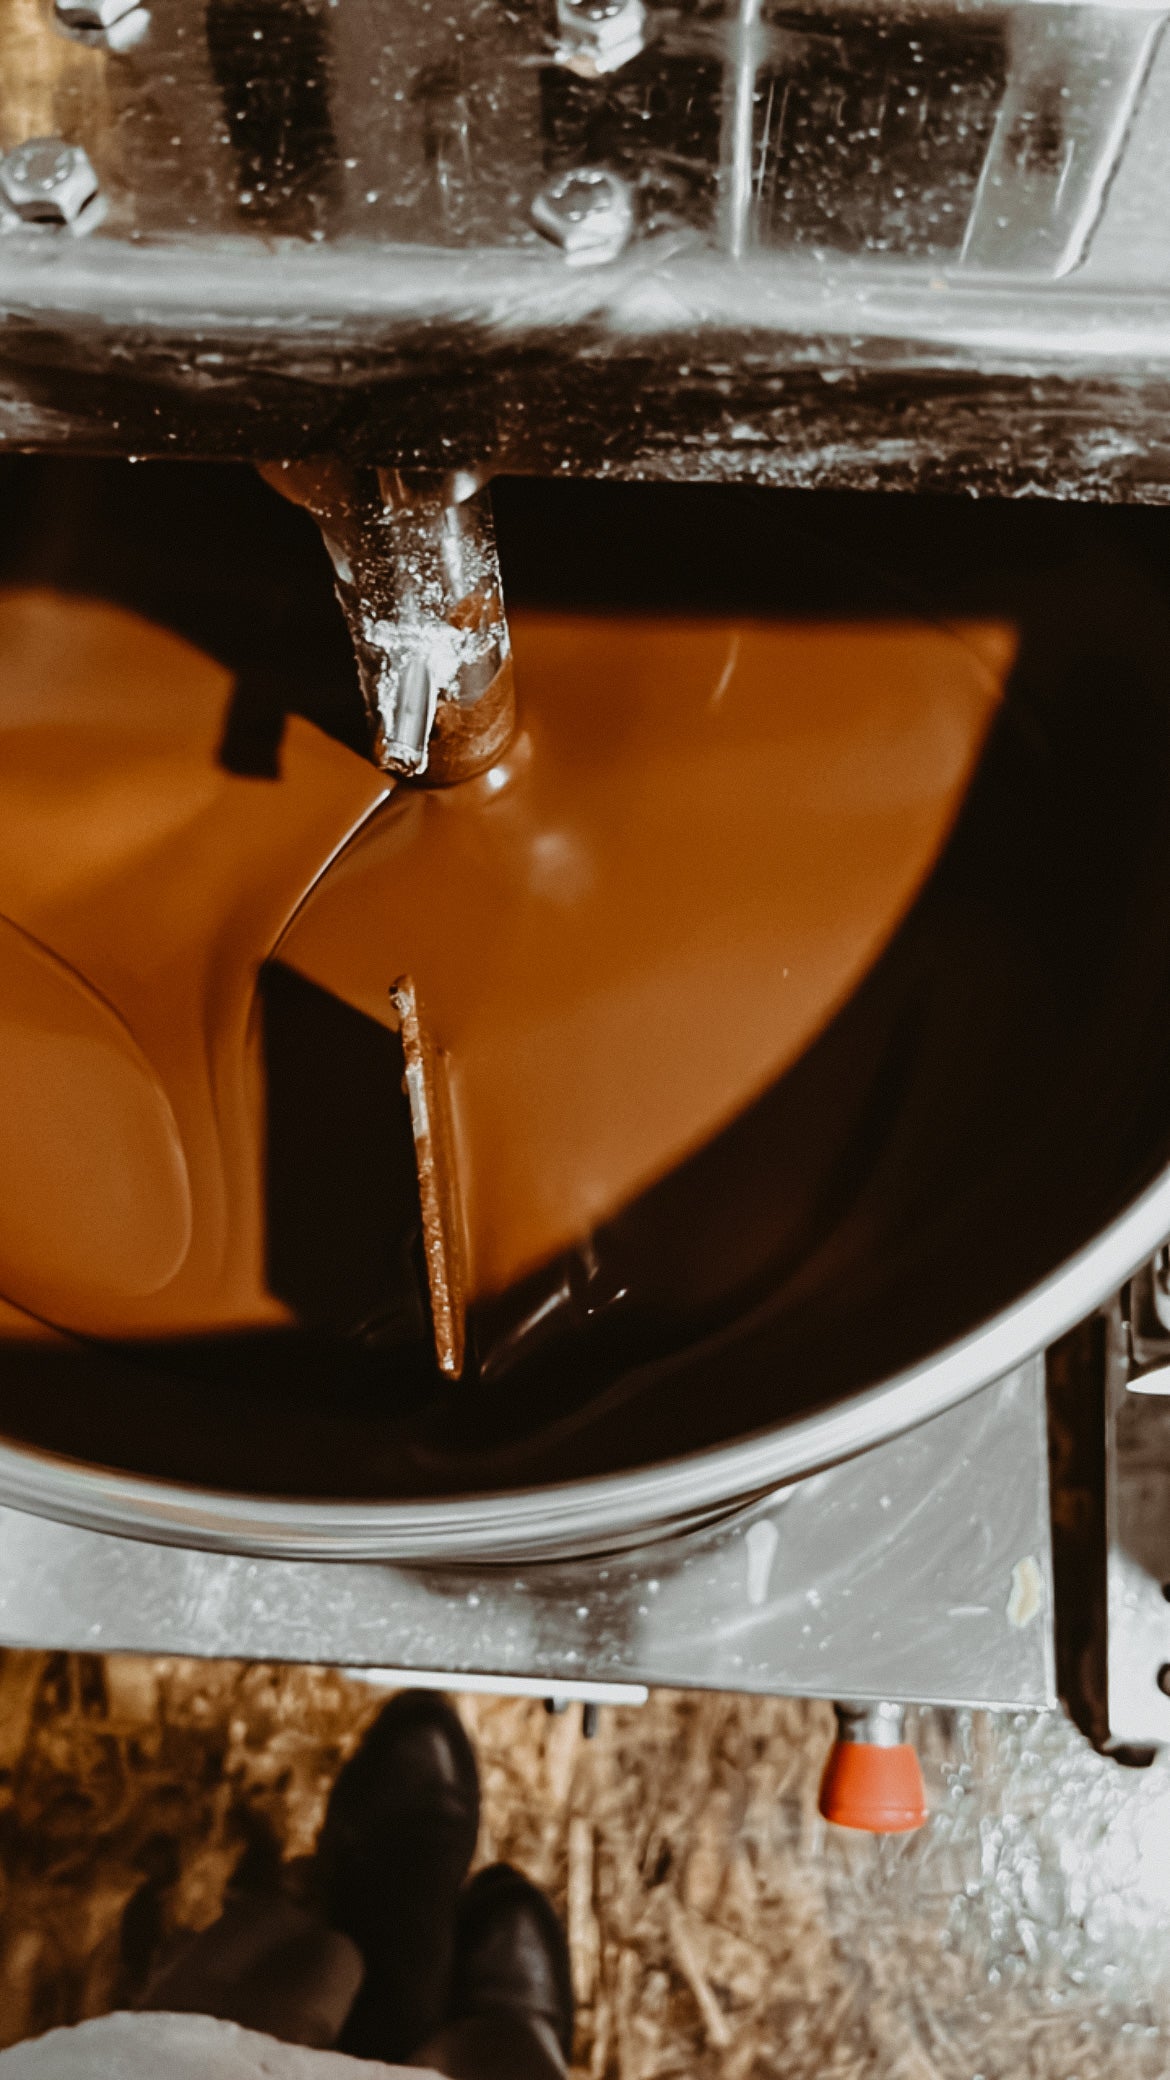 Tips for Identifying High Quality Chocolate